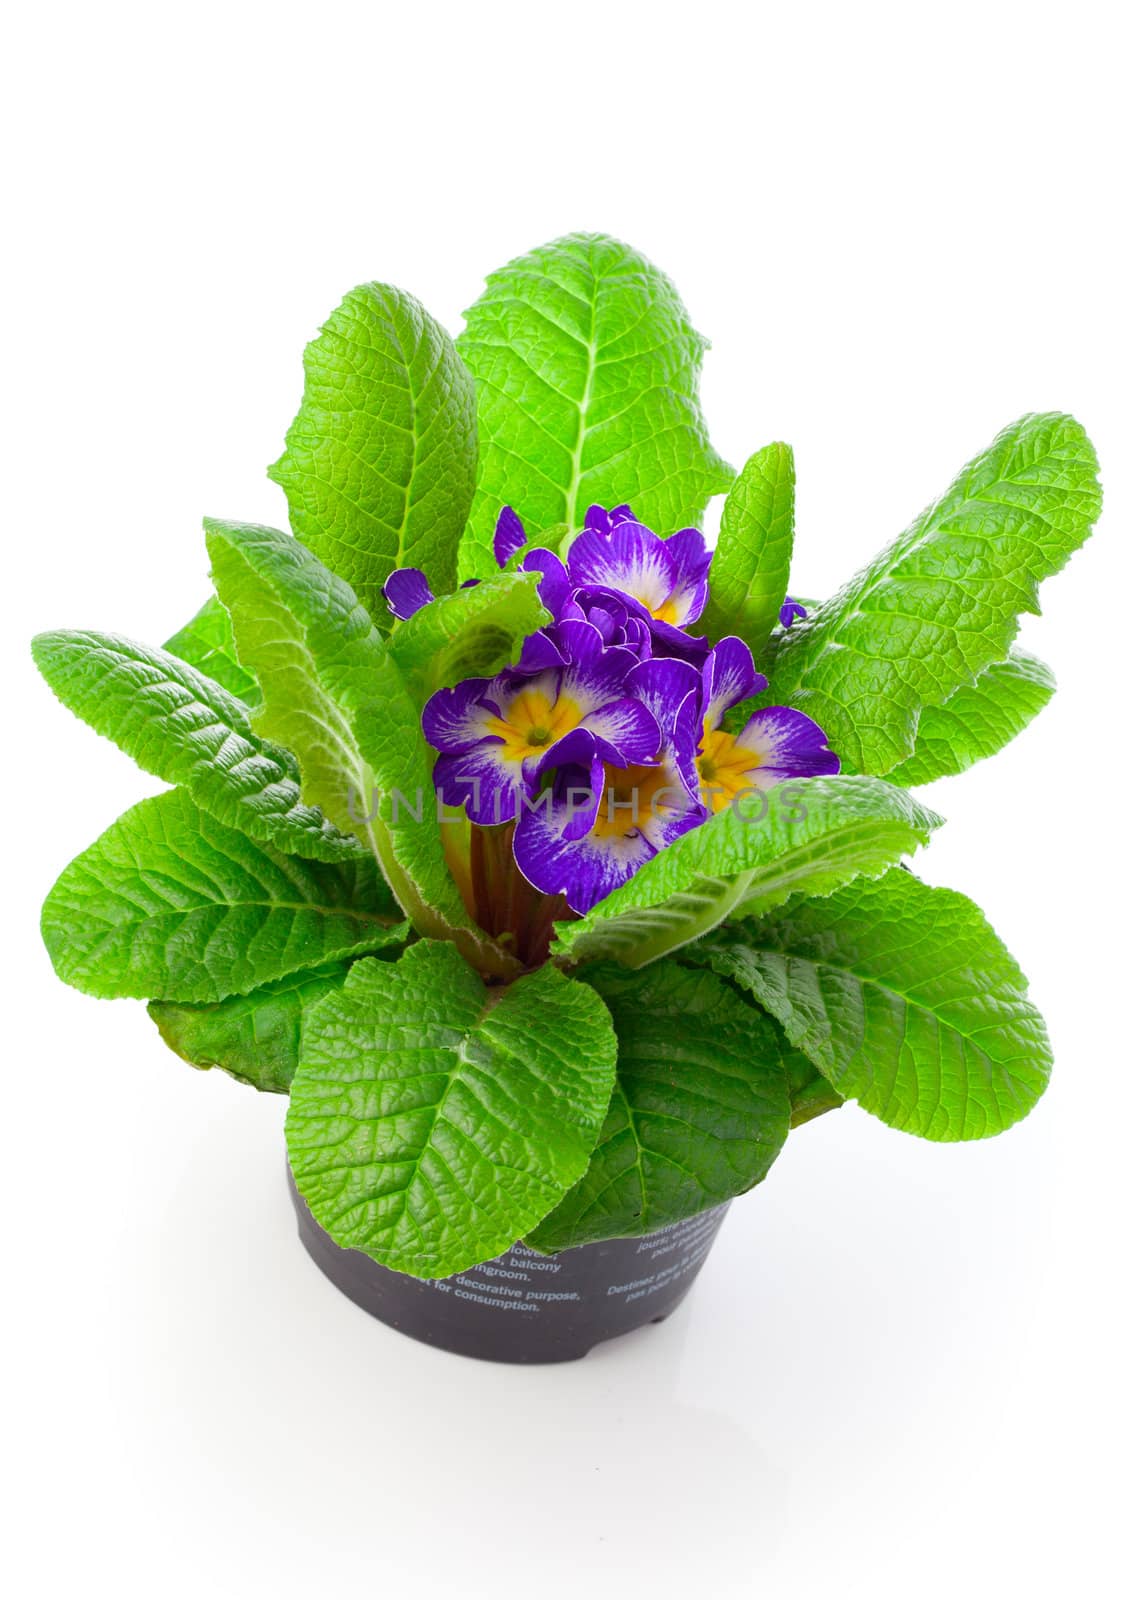 violet primula isolated over white background by motorolka